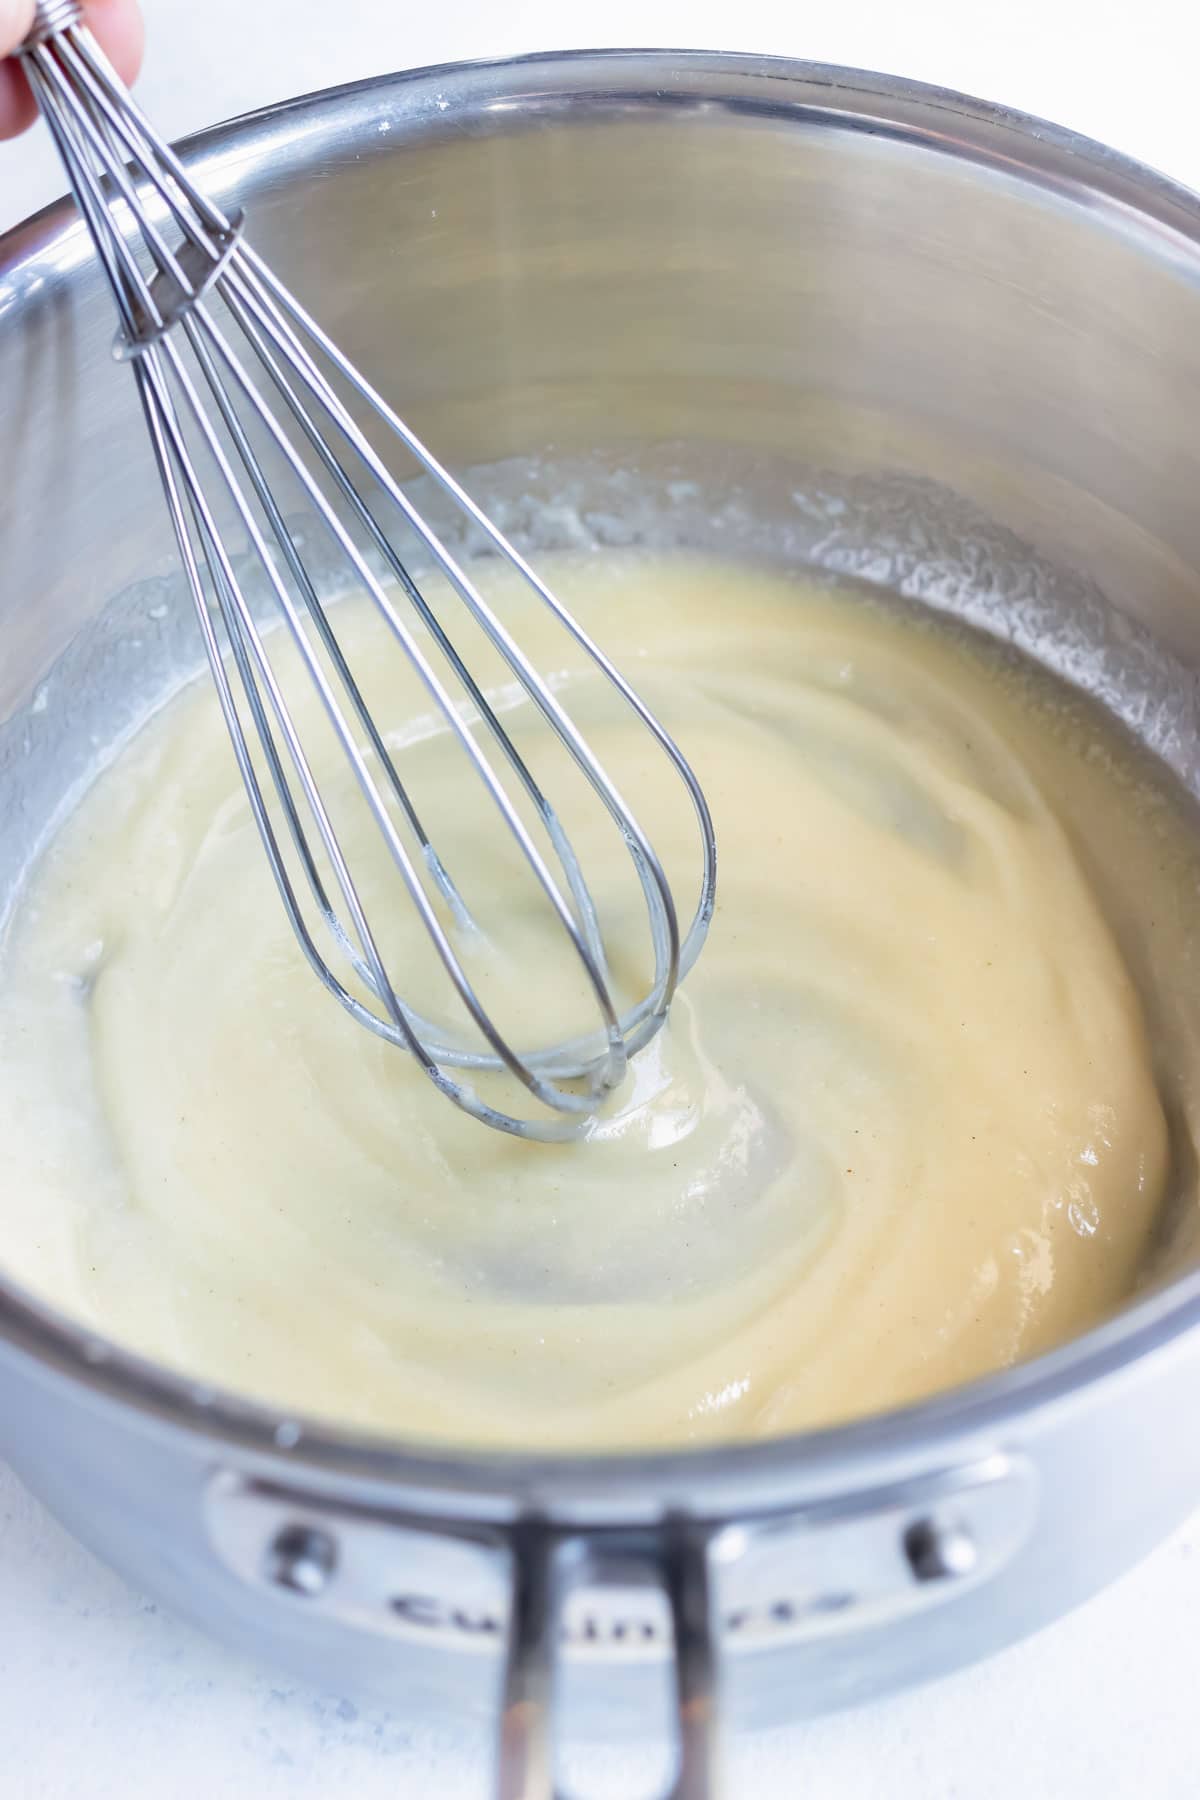 Ingredients are whisked together until combined.